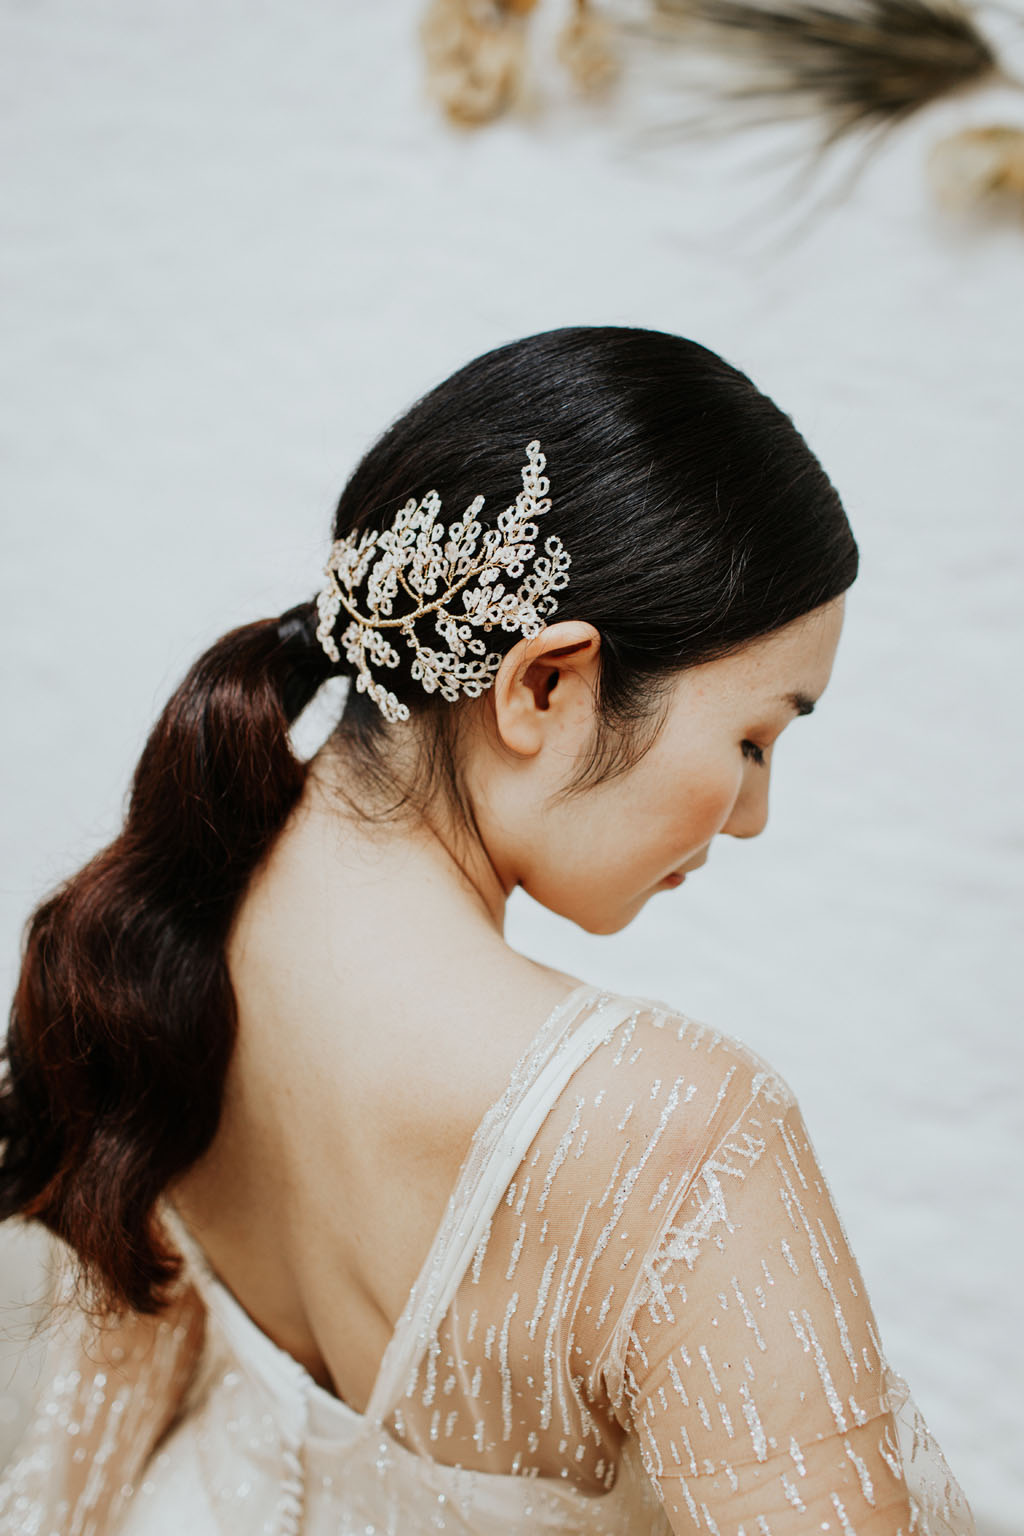 One of a kind luxury bridal accessories handmade by Clare Lloyd